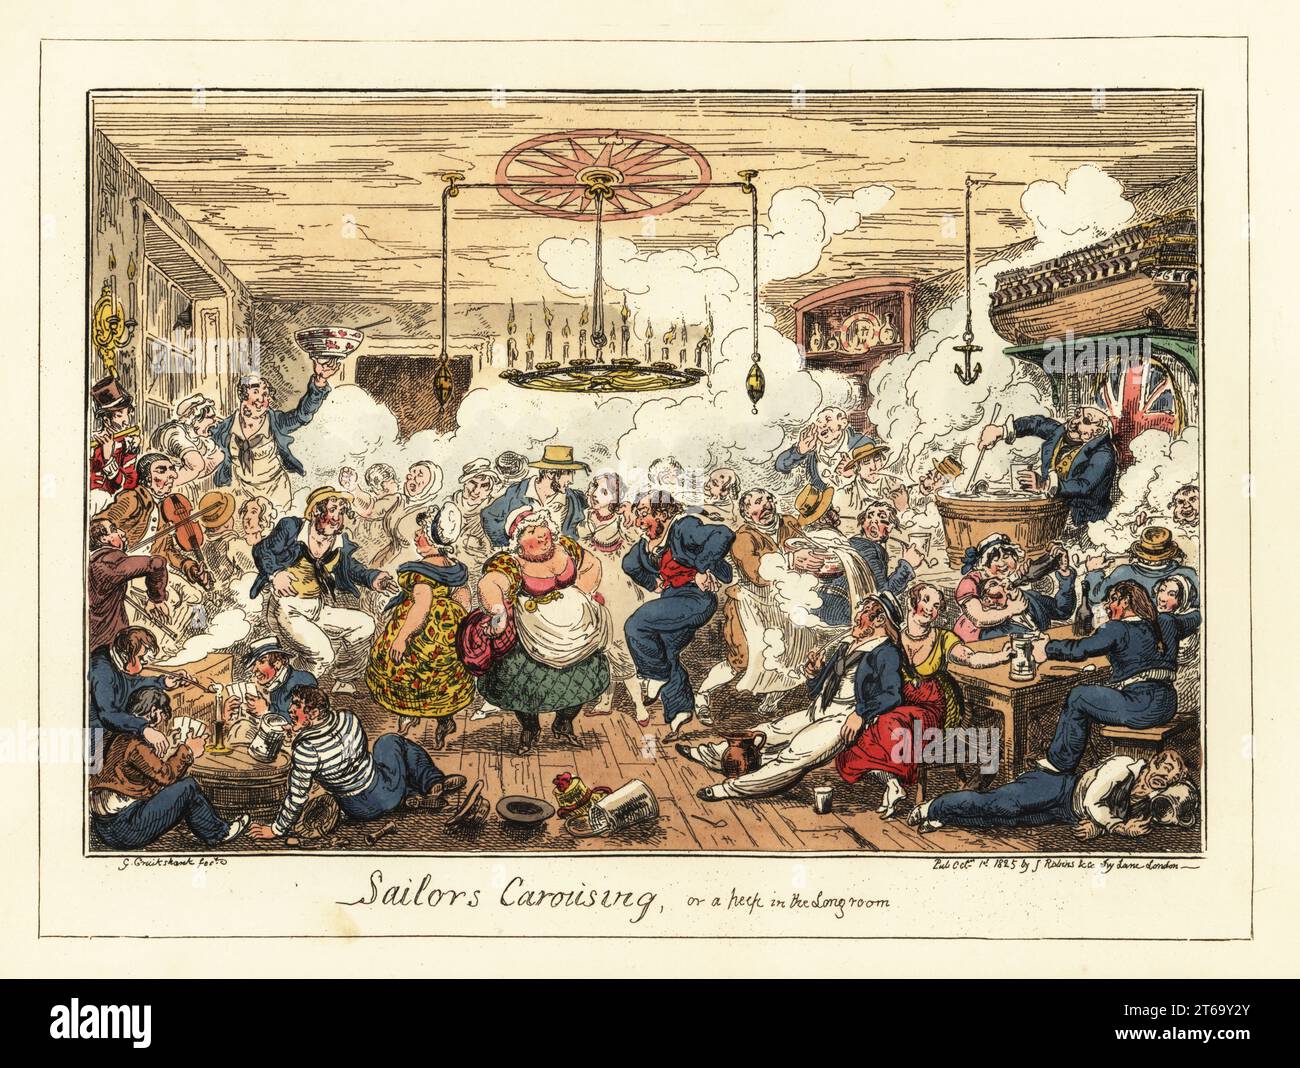 English sailors drinking and dancing in a pub, Napoleonic era. Midshipmen dance with prostitutes, drink punch, beer and wine, play cards, fall asleep drunk. The bar is decorated with a Union Jack, a hulk, anchors and lamps. Sailors Carousing, or a Peep in the Long Room. Handcoloured lithograph by George Cruikshank from Greenwich Hospital, a Series of Naval Sketches, by An Old Sailor (Matthew H. Barker), published by James Robins, London, 1826. Stock Photo